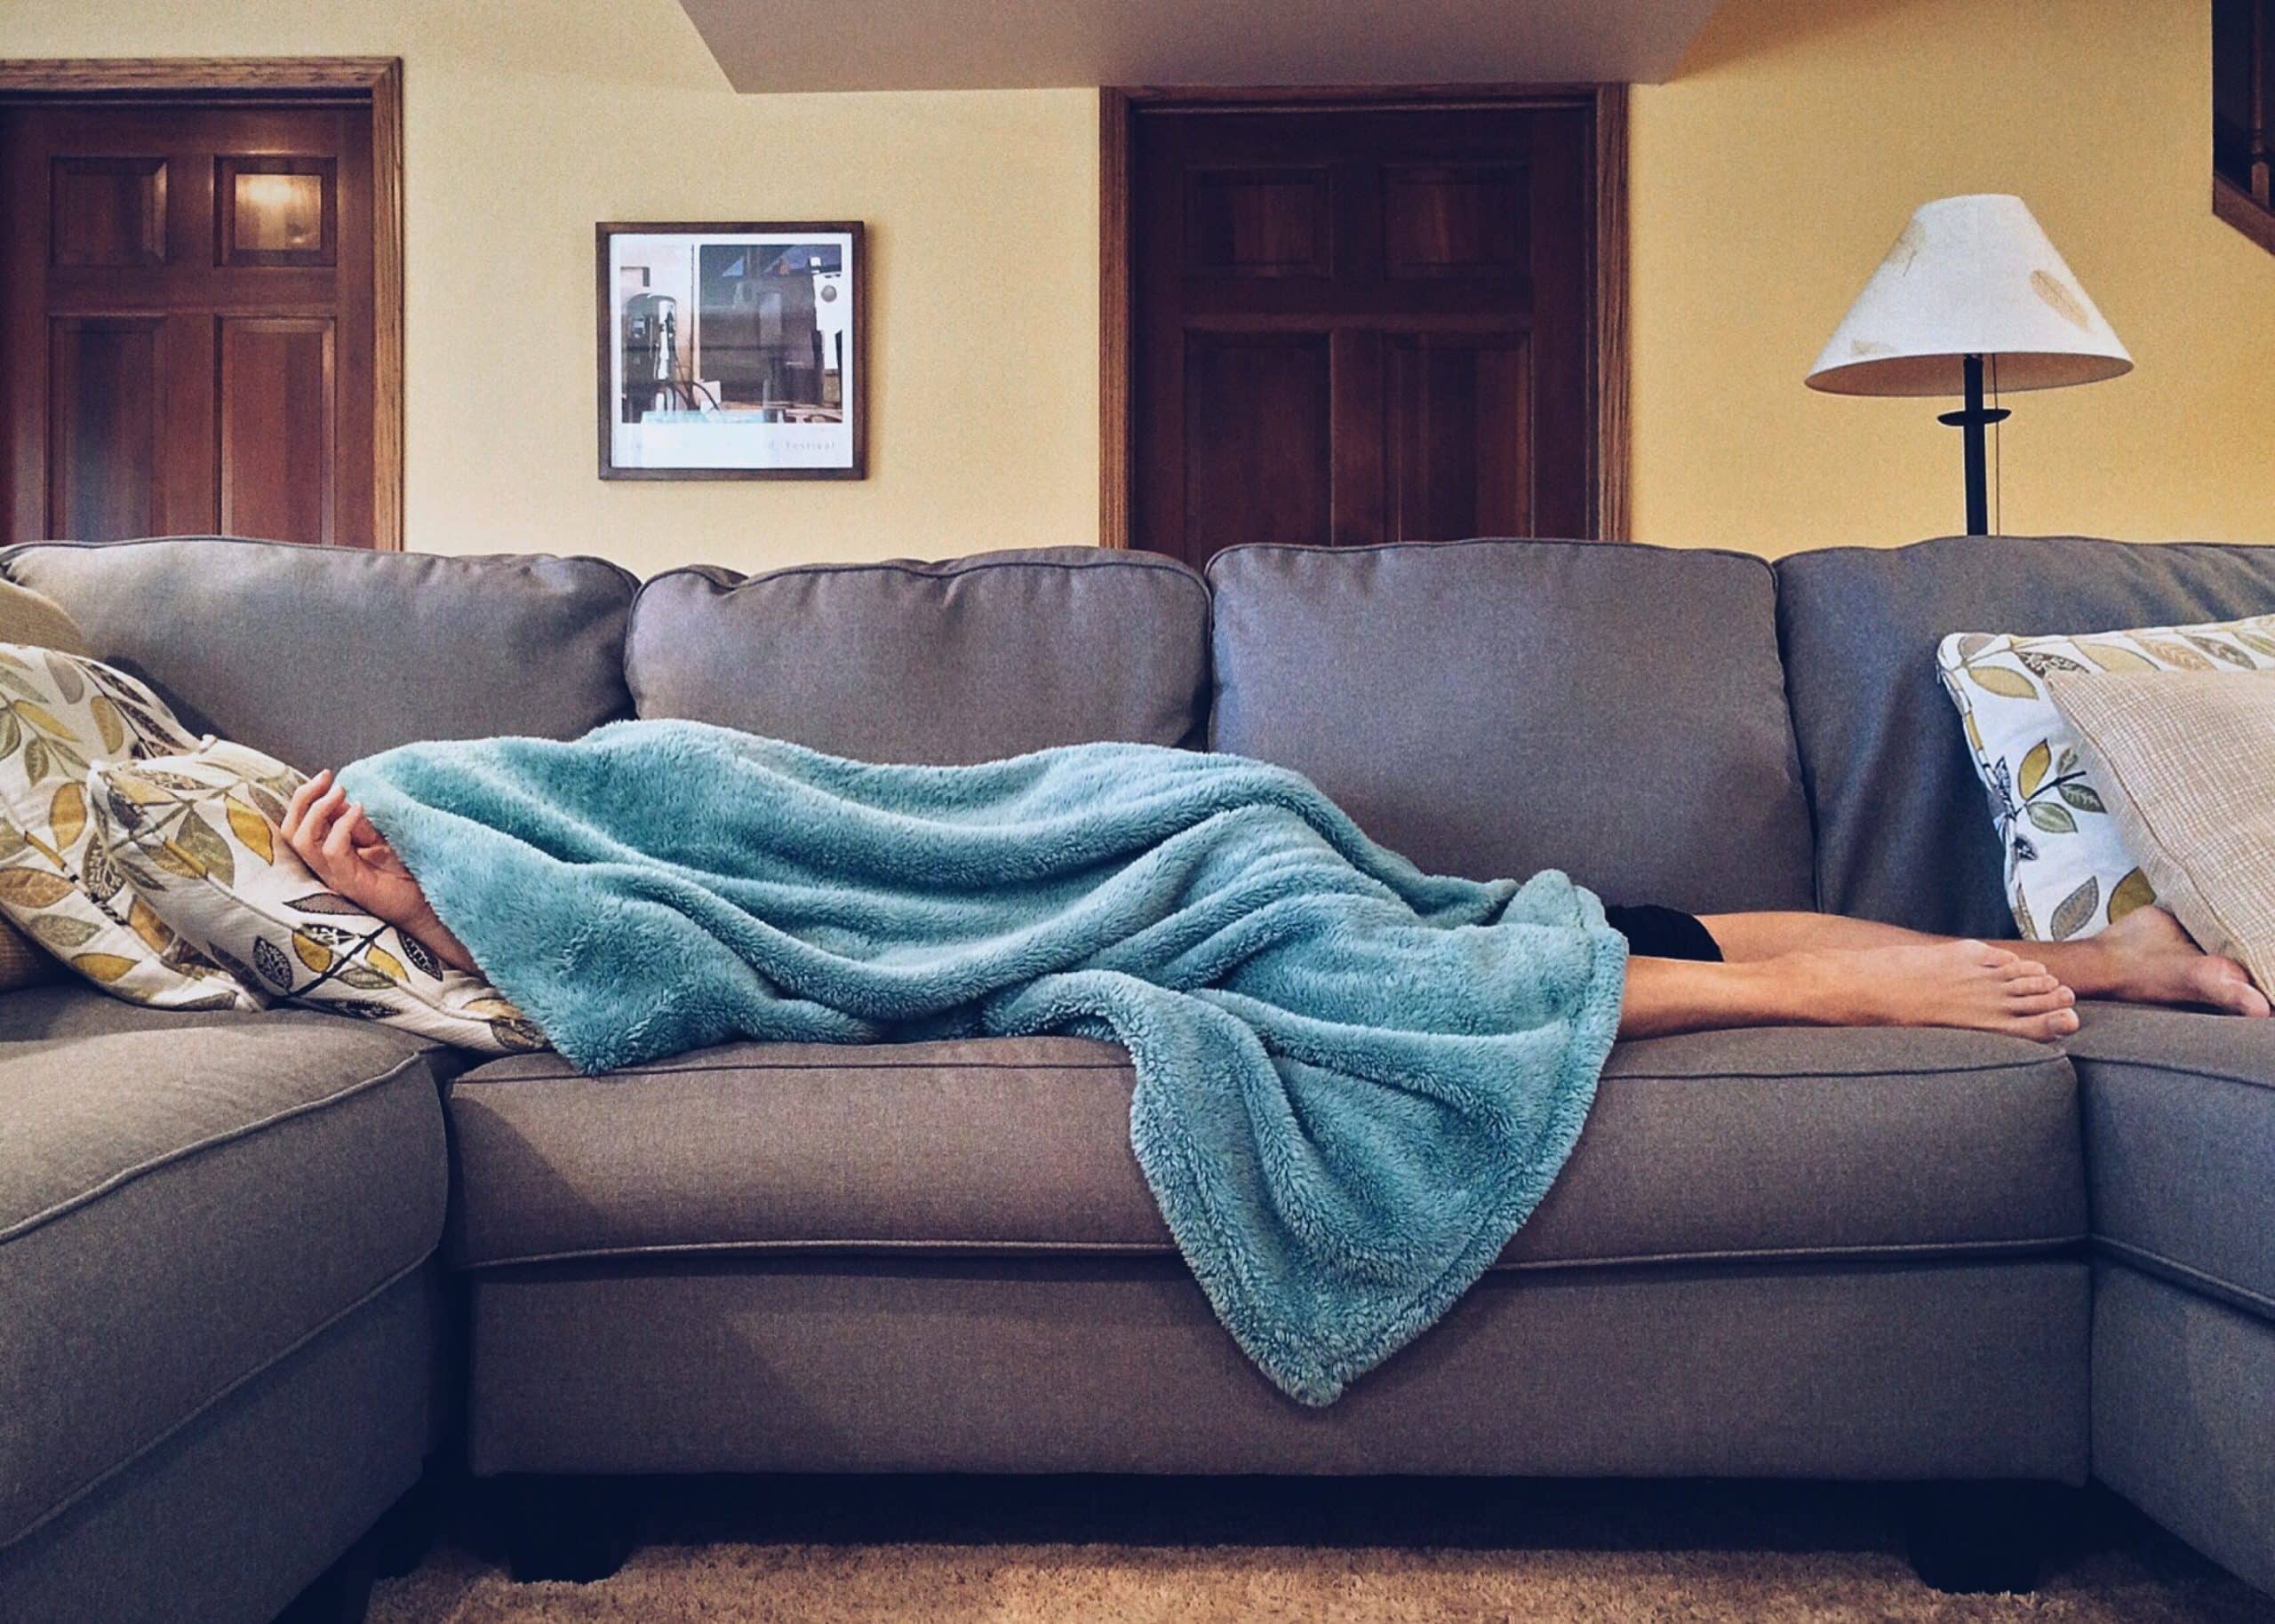 Photo of a person taking a nap on a grey couch with a blue blanket